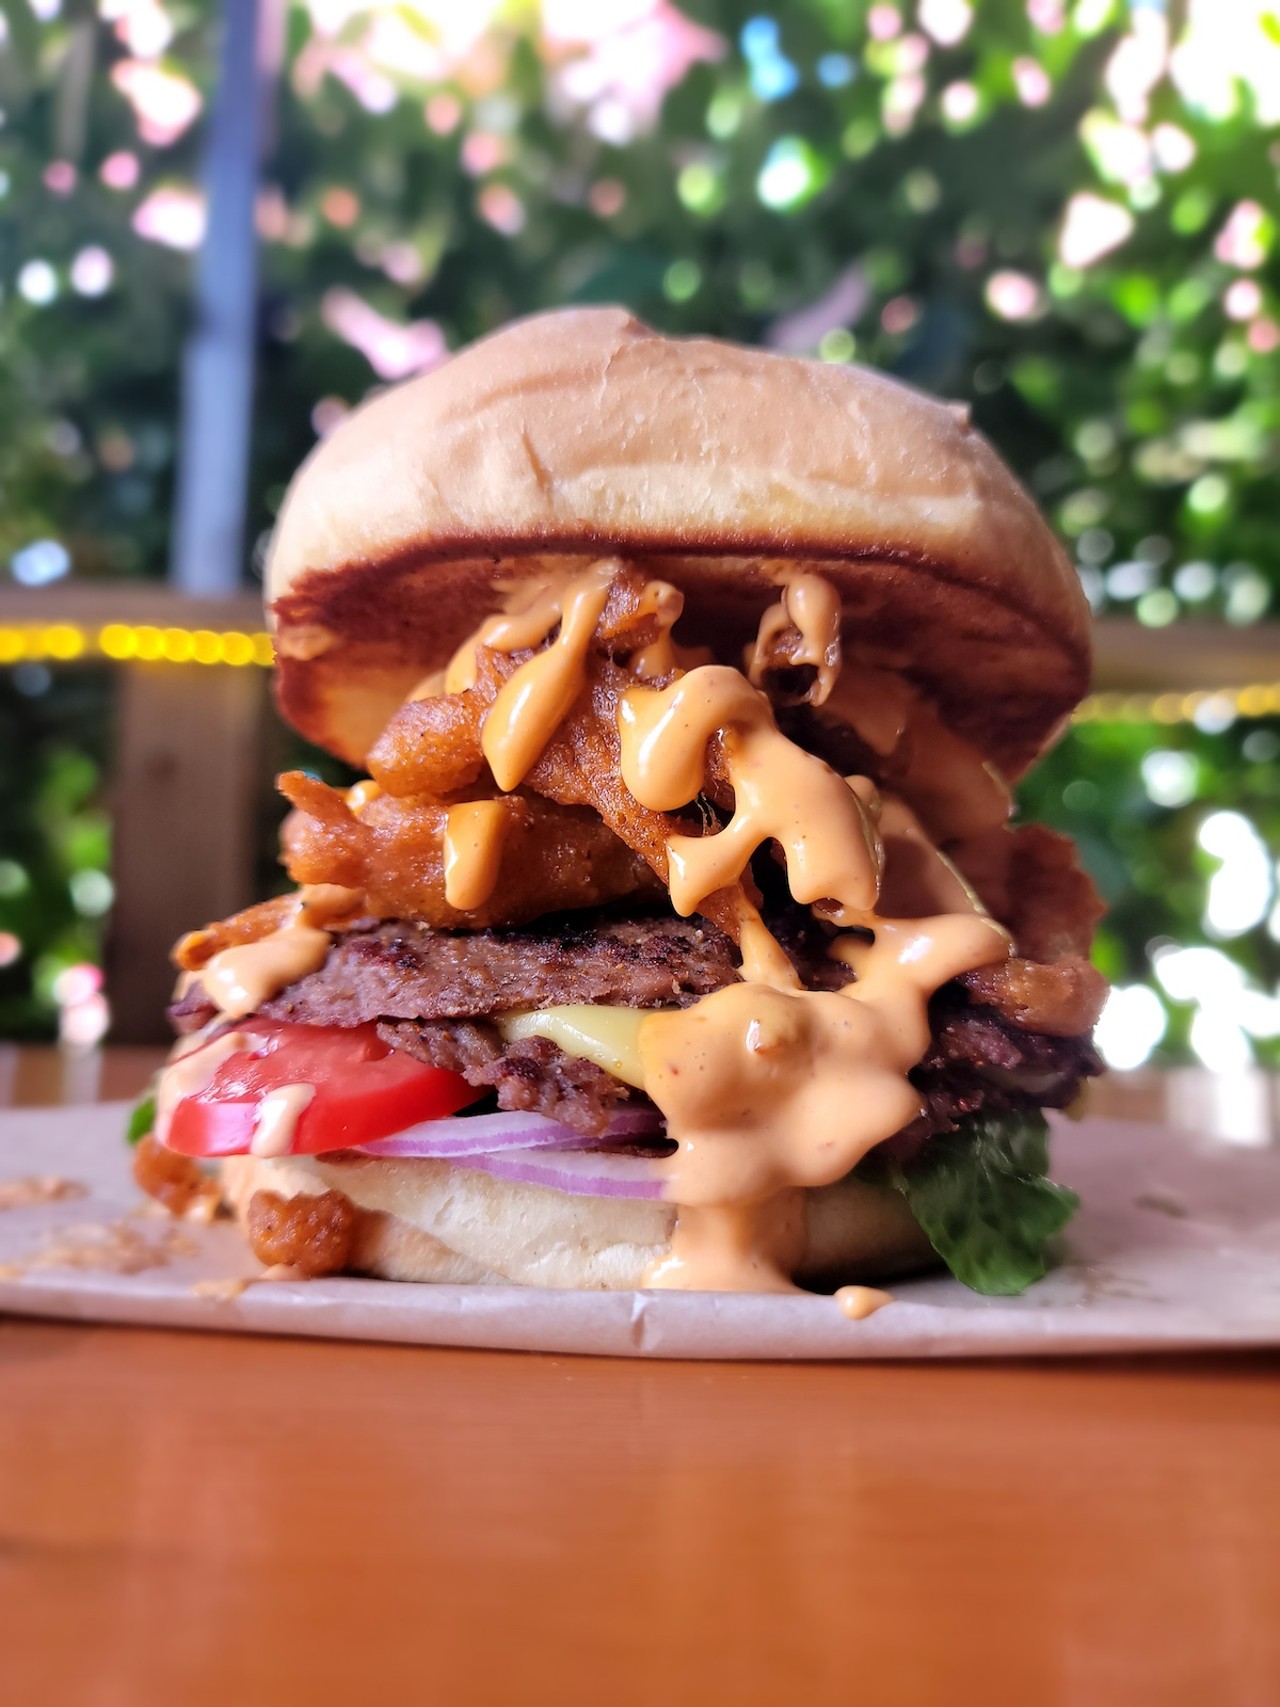 
3 Dot Dash
6203 N Florida Ave., Tampa.
Up In Smoke Burger: Two smashed Impossible patties topped with thinly sliced, blackened and fried 'tobacco onions,' smokey chipotle mayo, melted vegan gouda, lettuce, tomato, red onion and pickles. ($14)
Photo courtesy of 3 Dot Dash